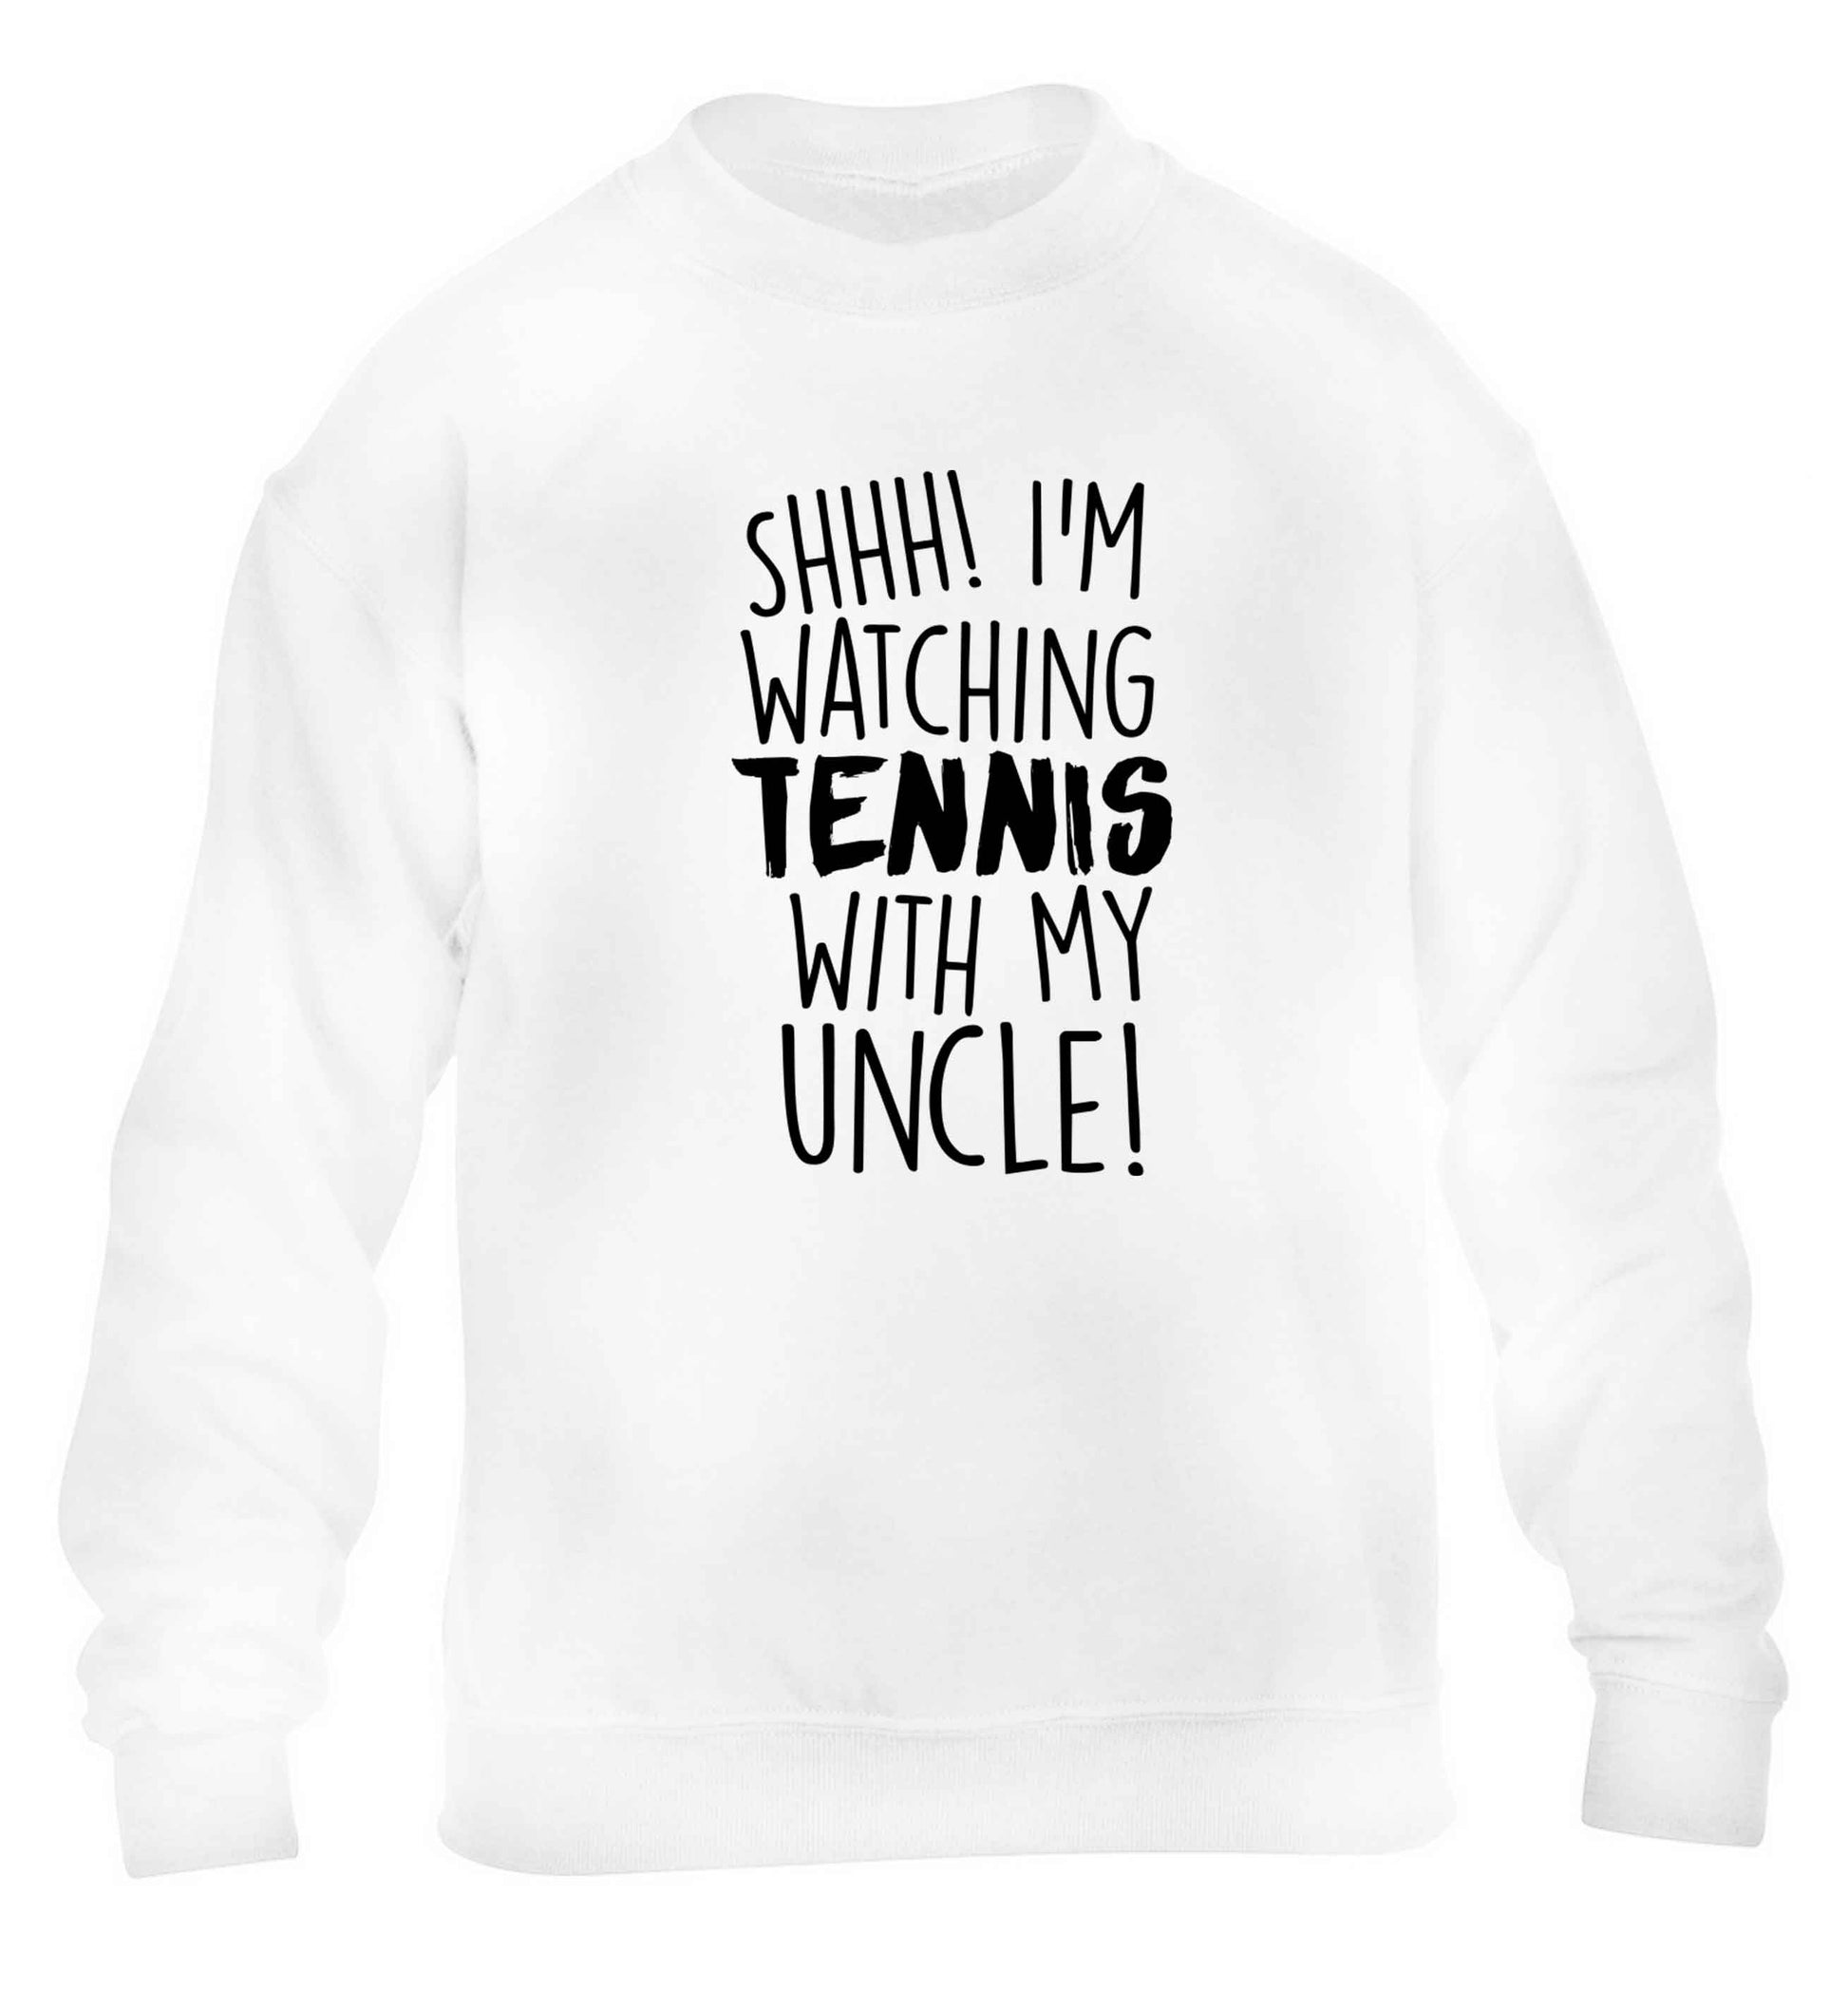 Shh! I'm watching tennis with my uncle! children's white sweater 12-13 Years